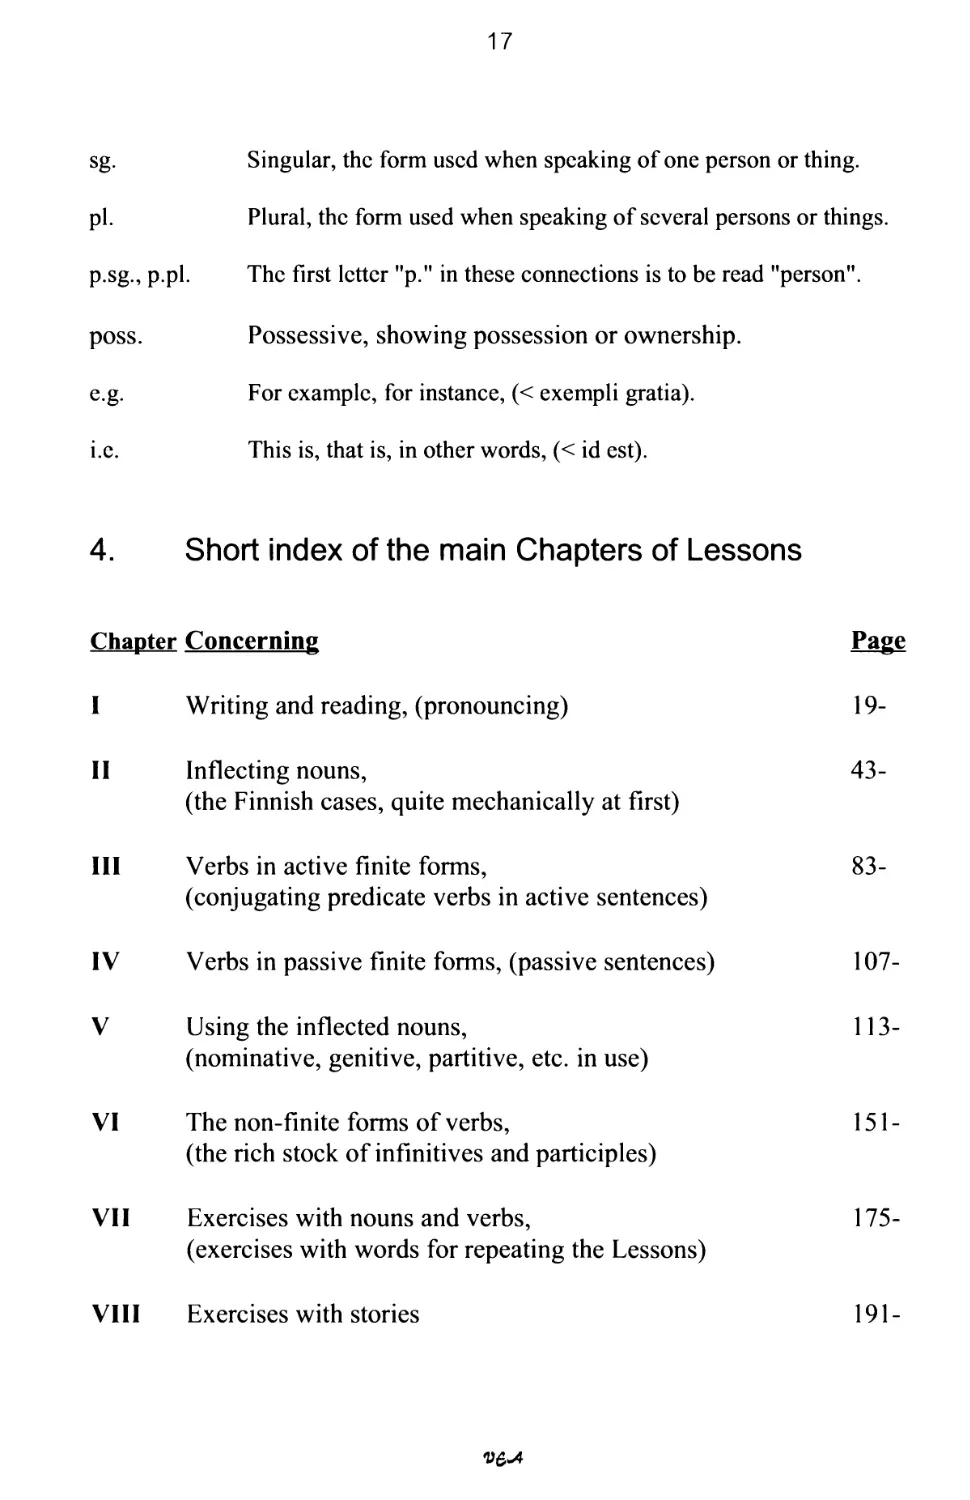 4. Short index of the main Chapters of Lessons